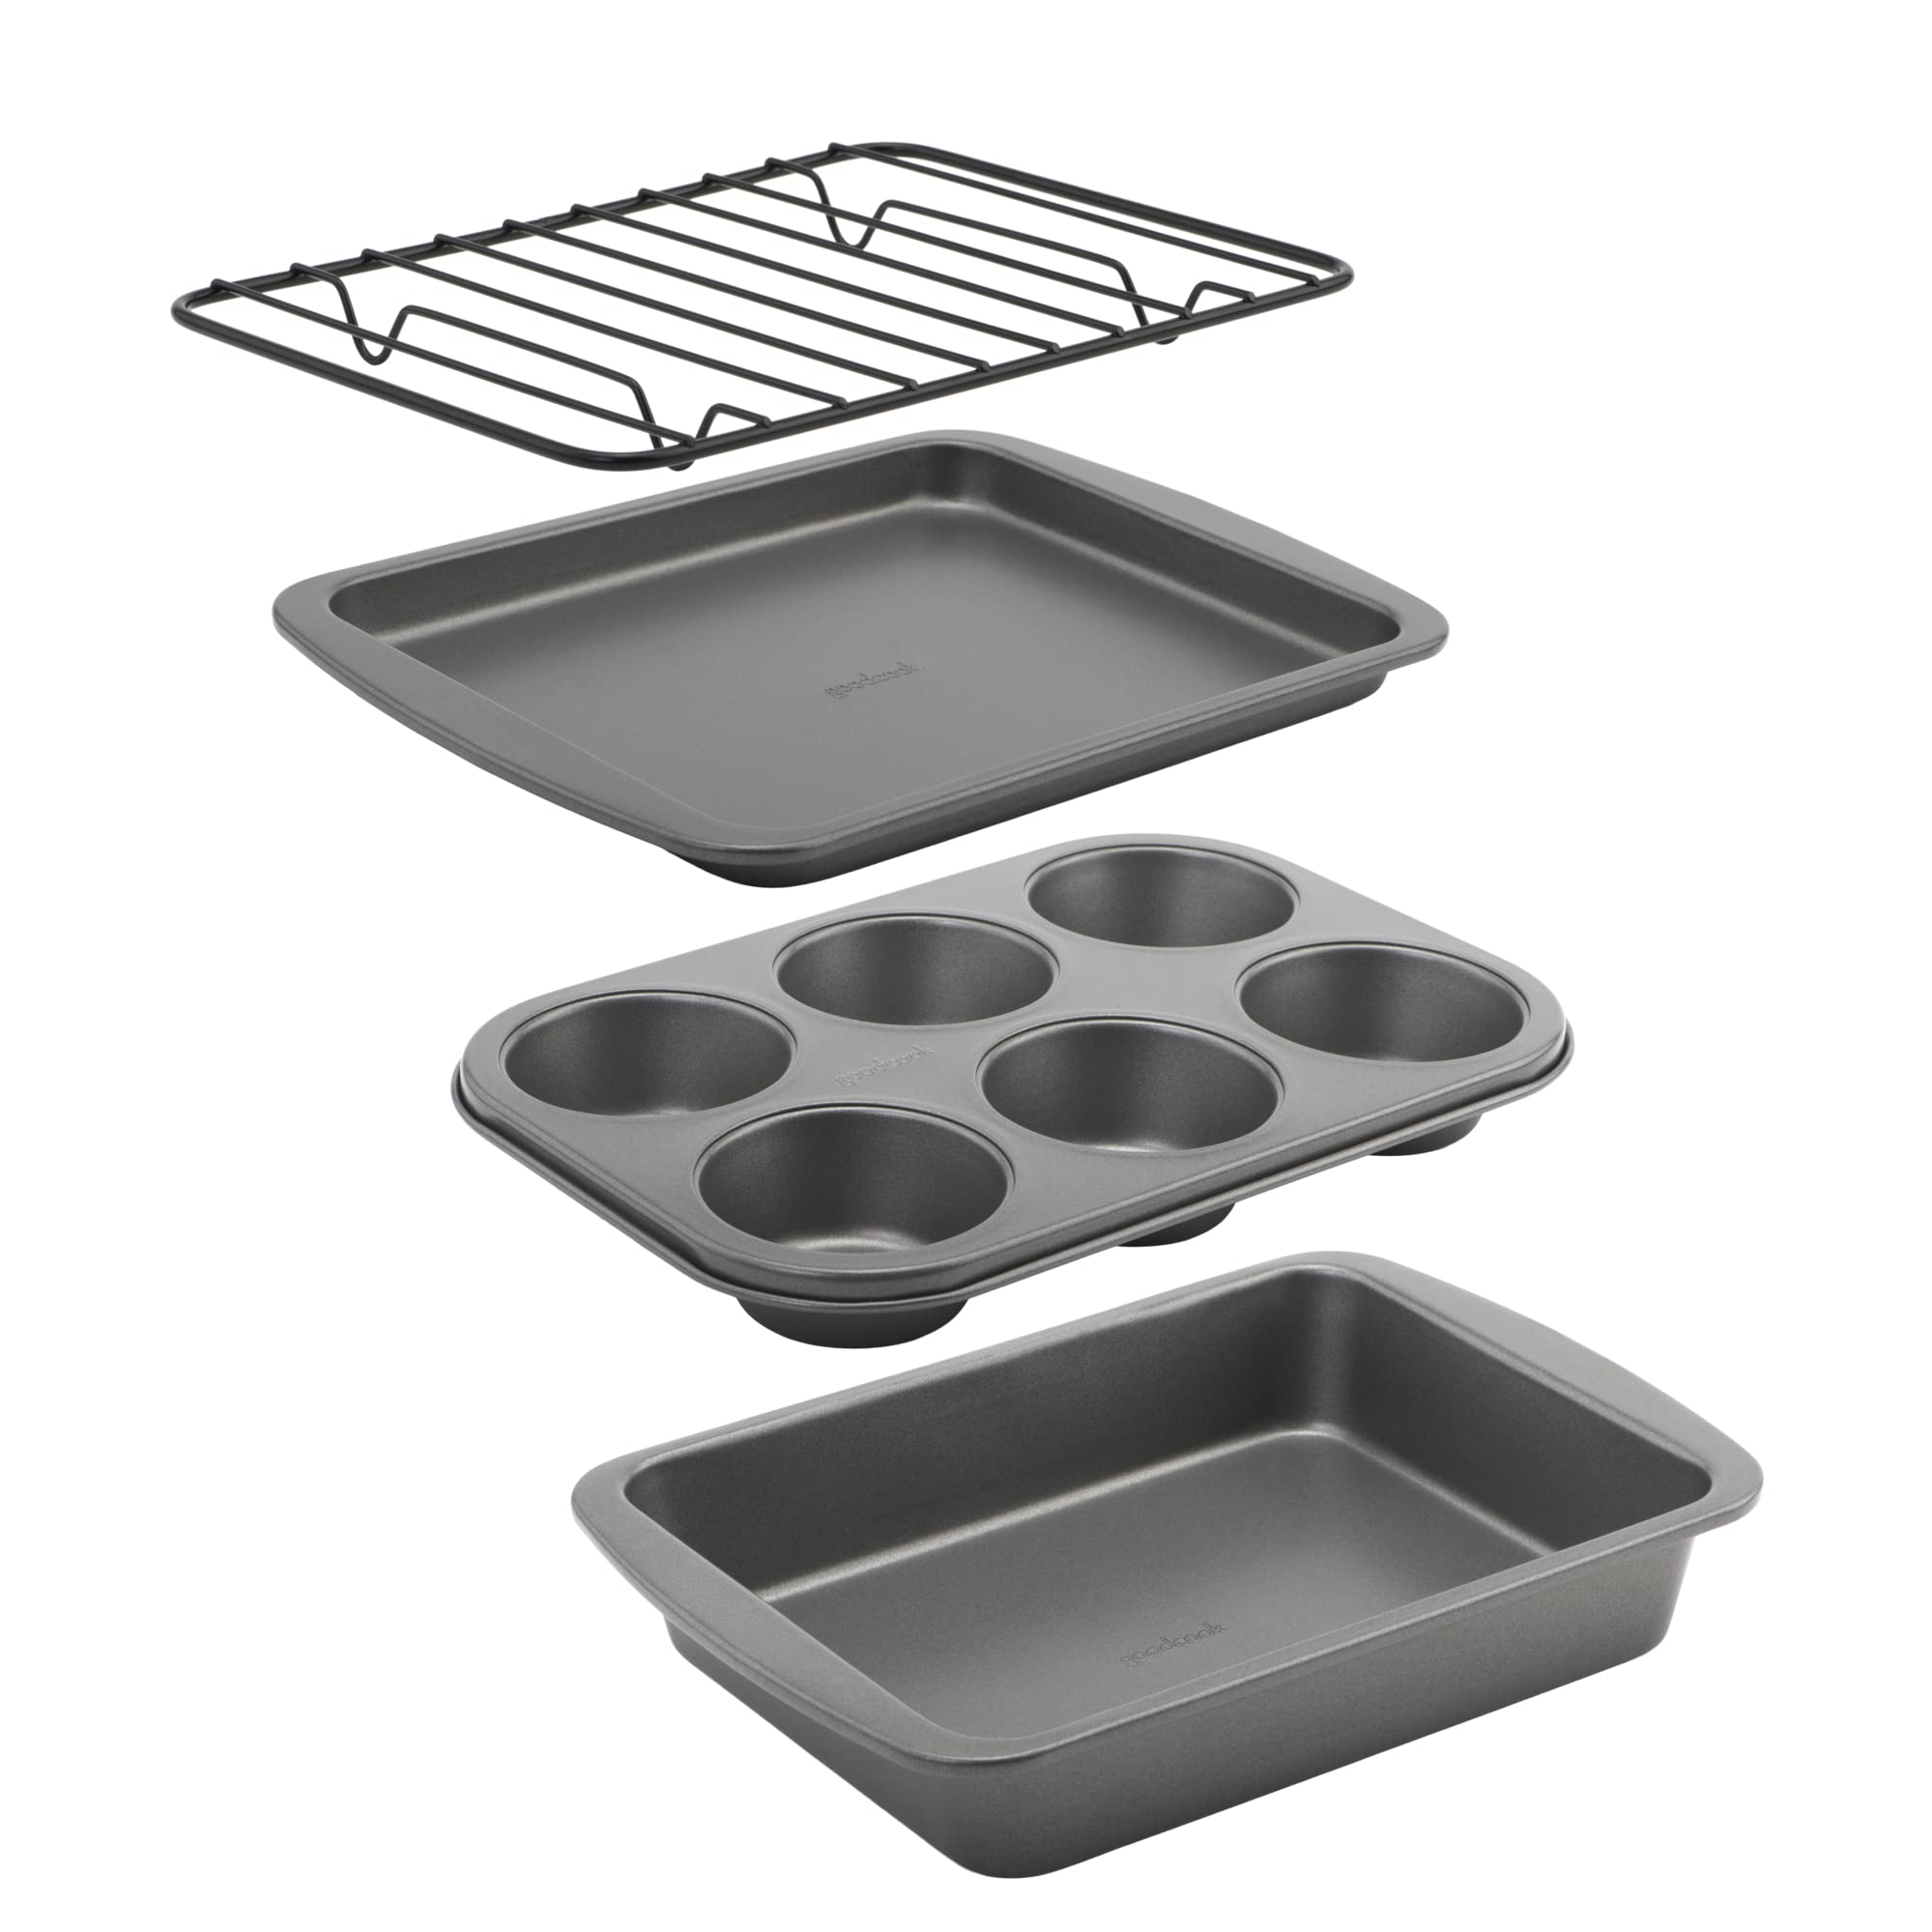 GoodCook 4-Piece Nonstick Steel Toaster Oven Set with Sheet Pan, Rack, Cake Pan, and Muffin Pan, Gray (4220)